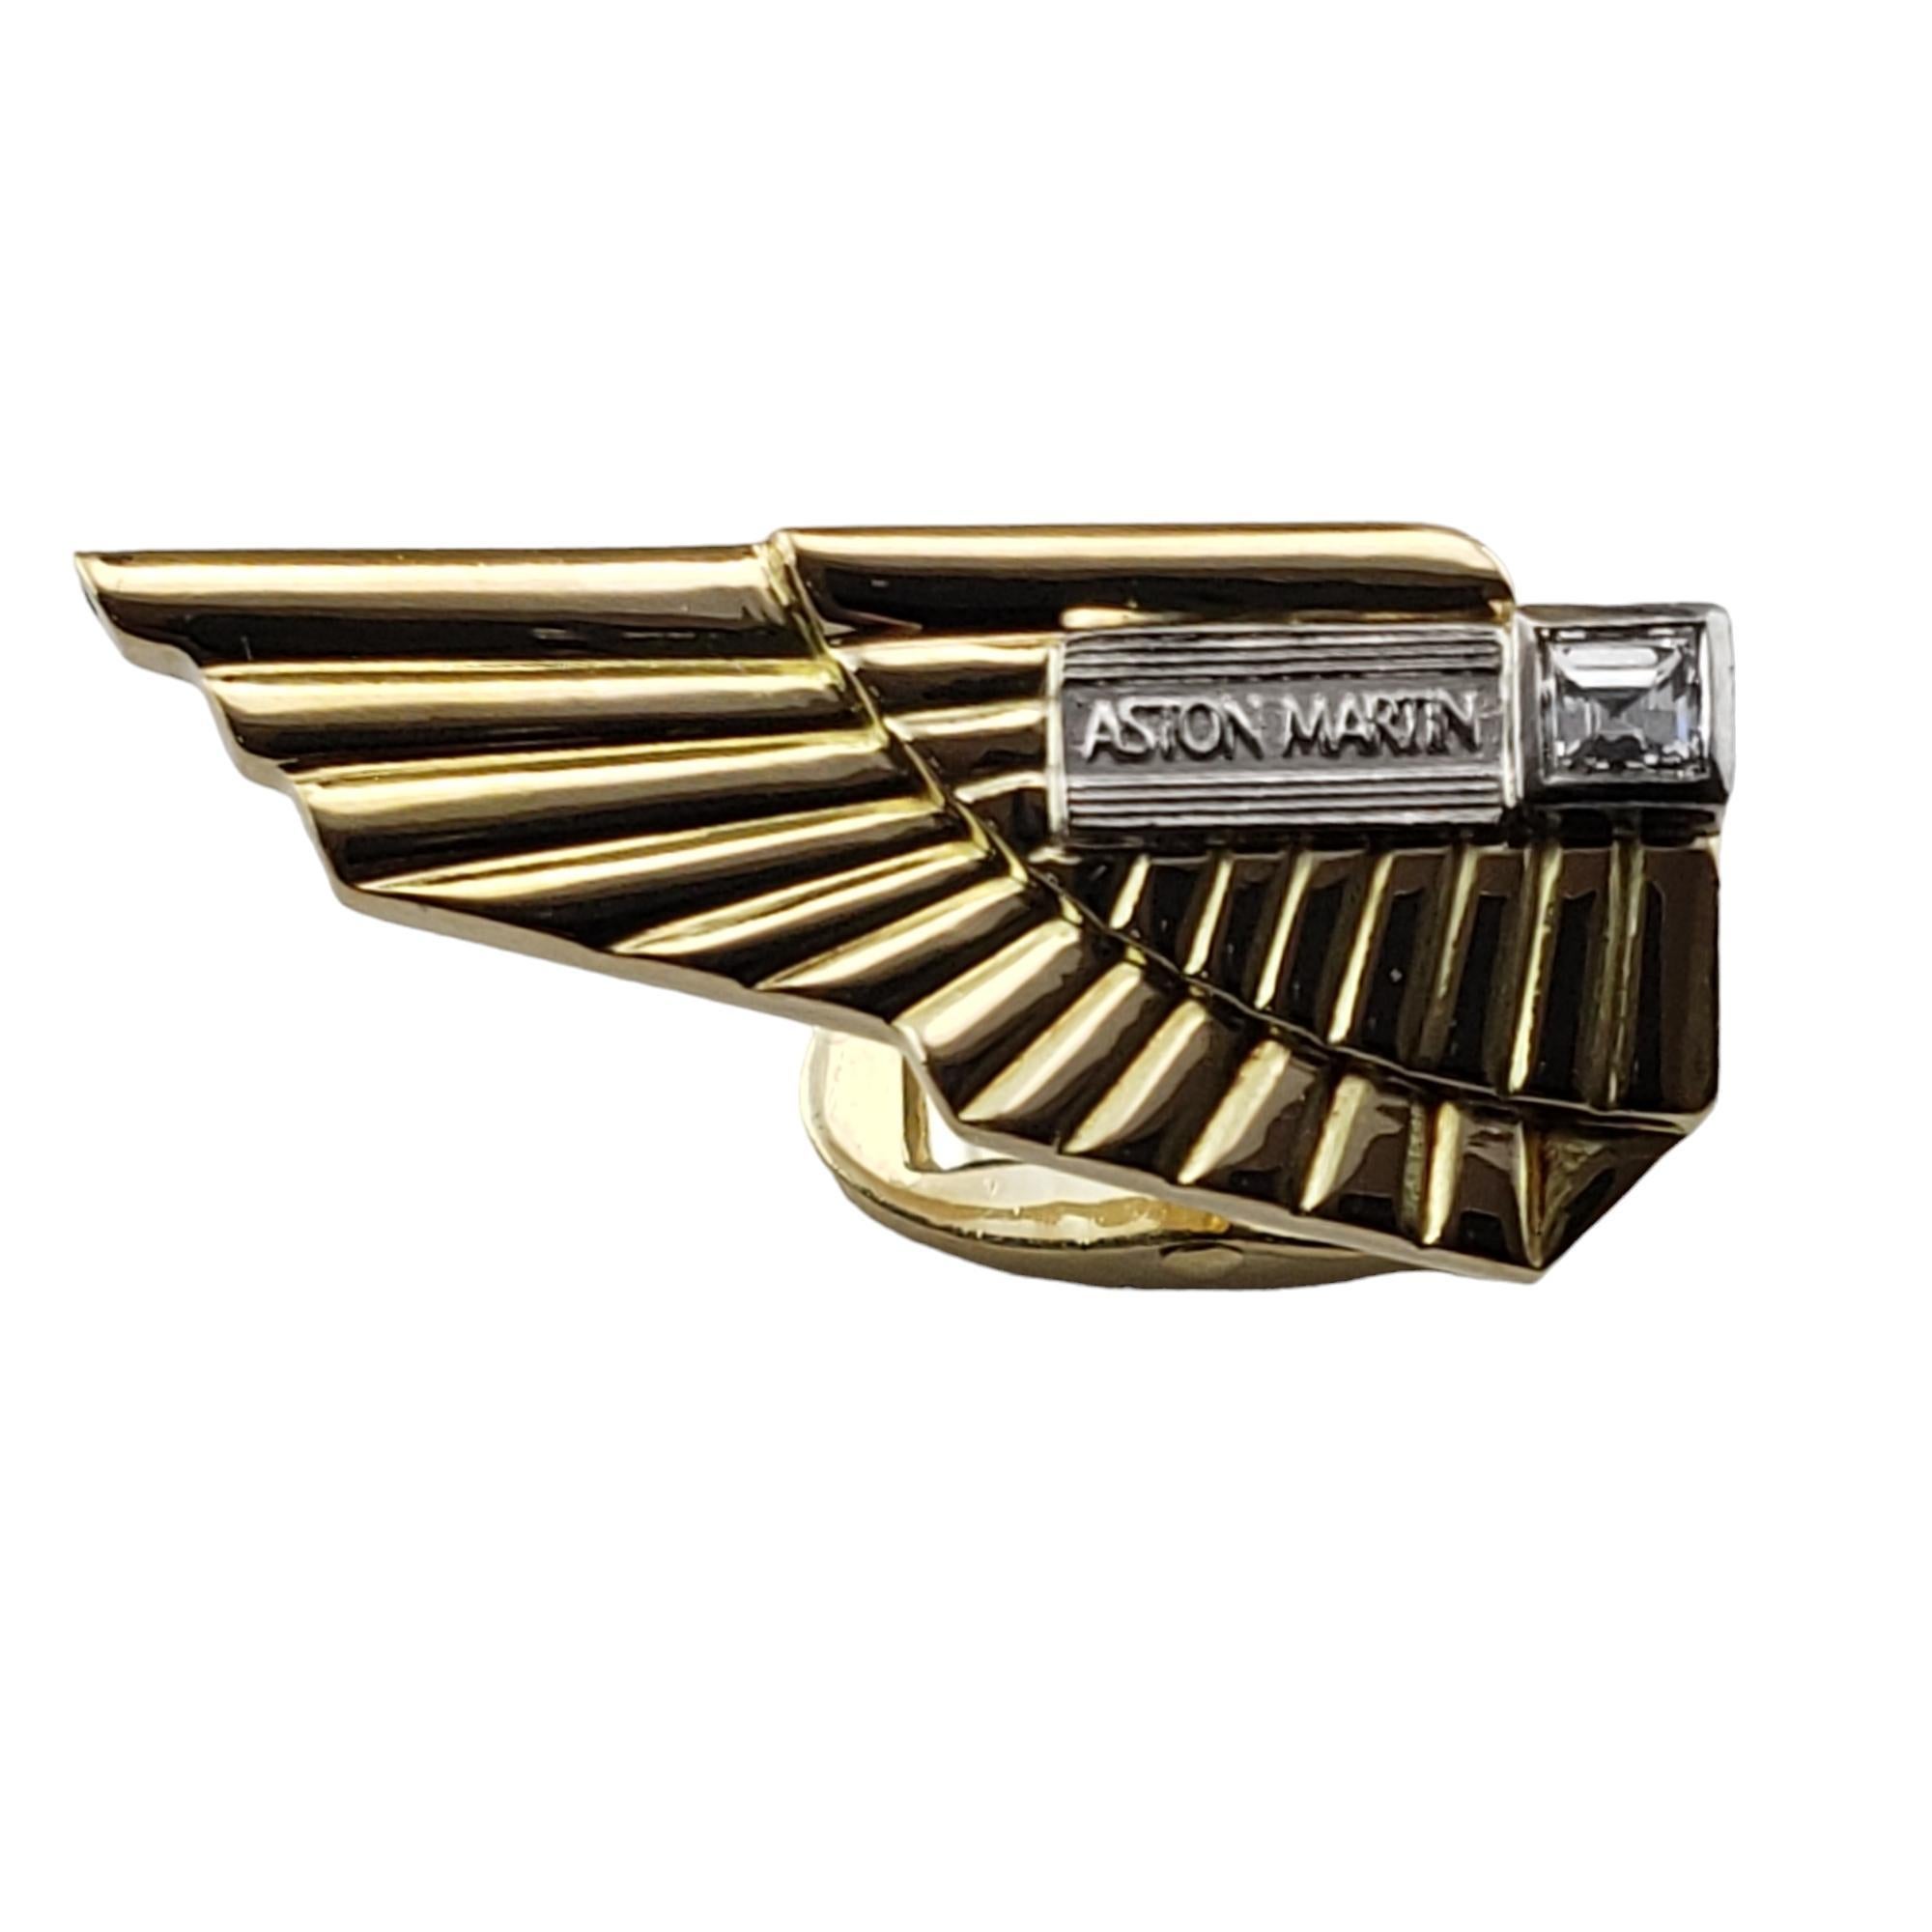 Vintage 18 Karat Yellow Gold and Diamond Aston Martin Cufflinks-

These elegant Aston Martin logo cufflinks are crafted in beautifully detailed 18K yellow gold.

Approximate total diamond weight:

Diamond color:

Diamond clarity:

Size: 24 mm x 11